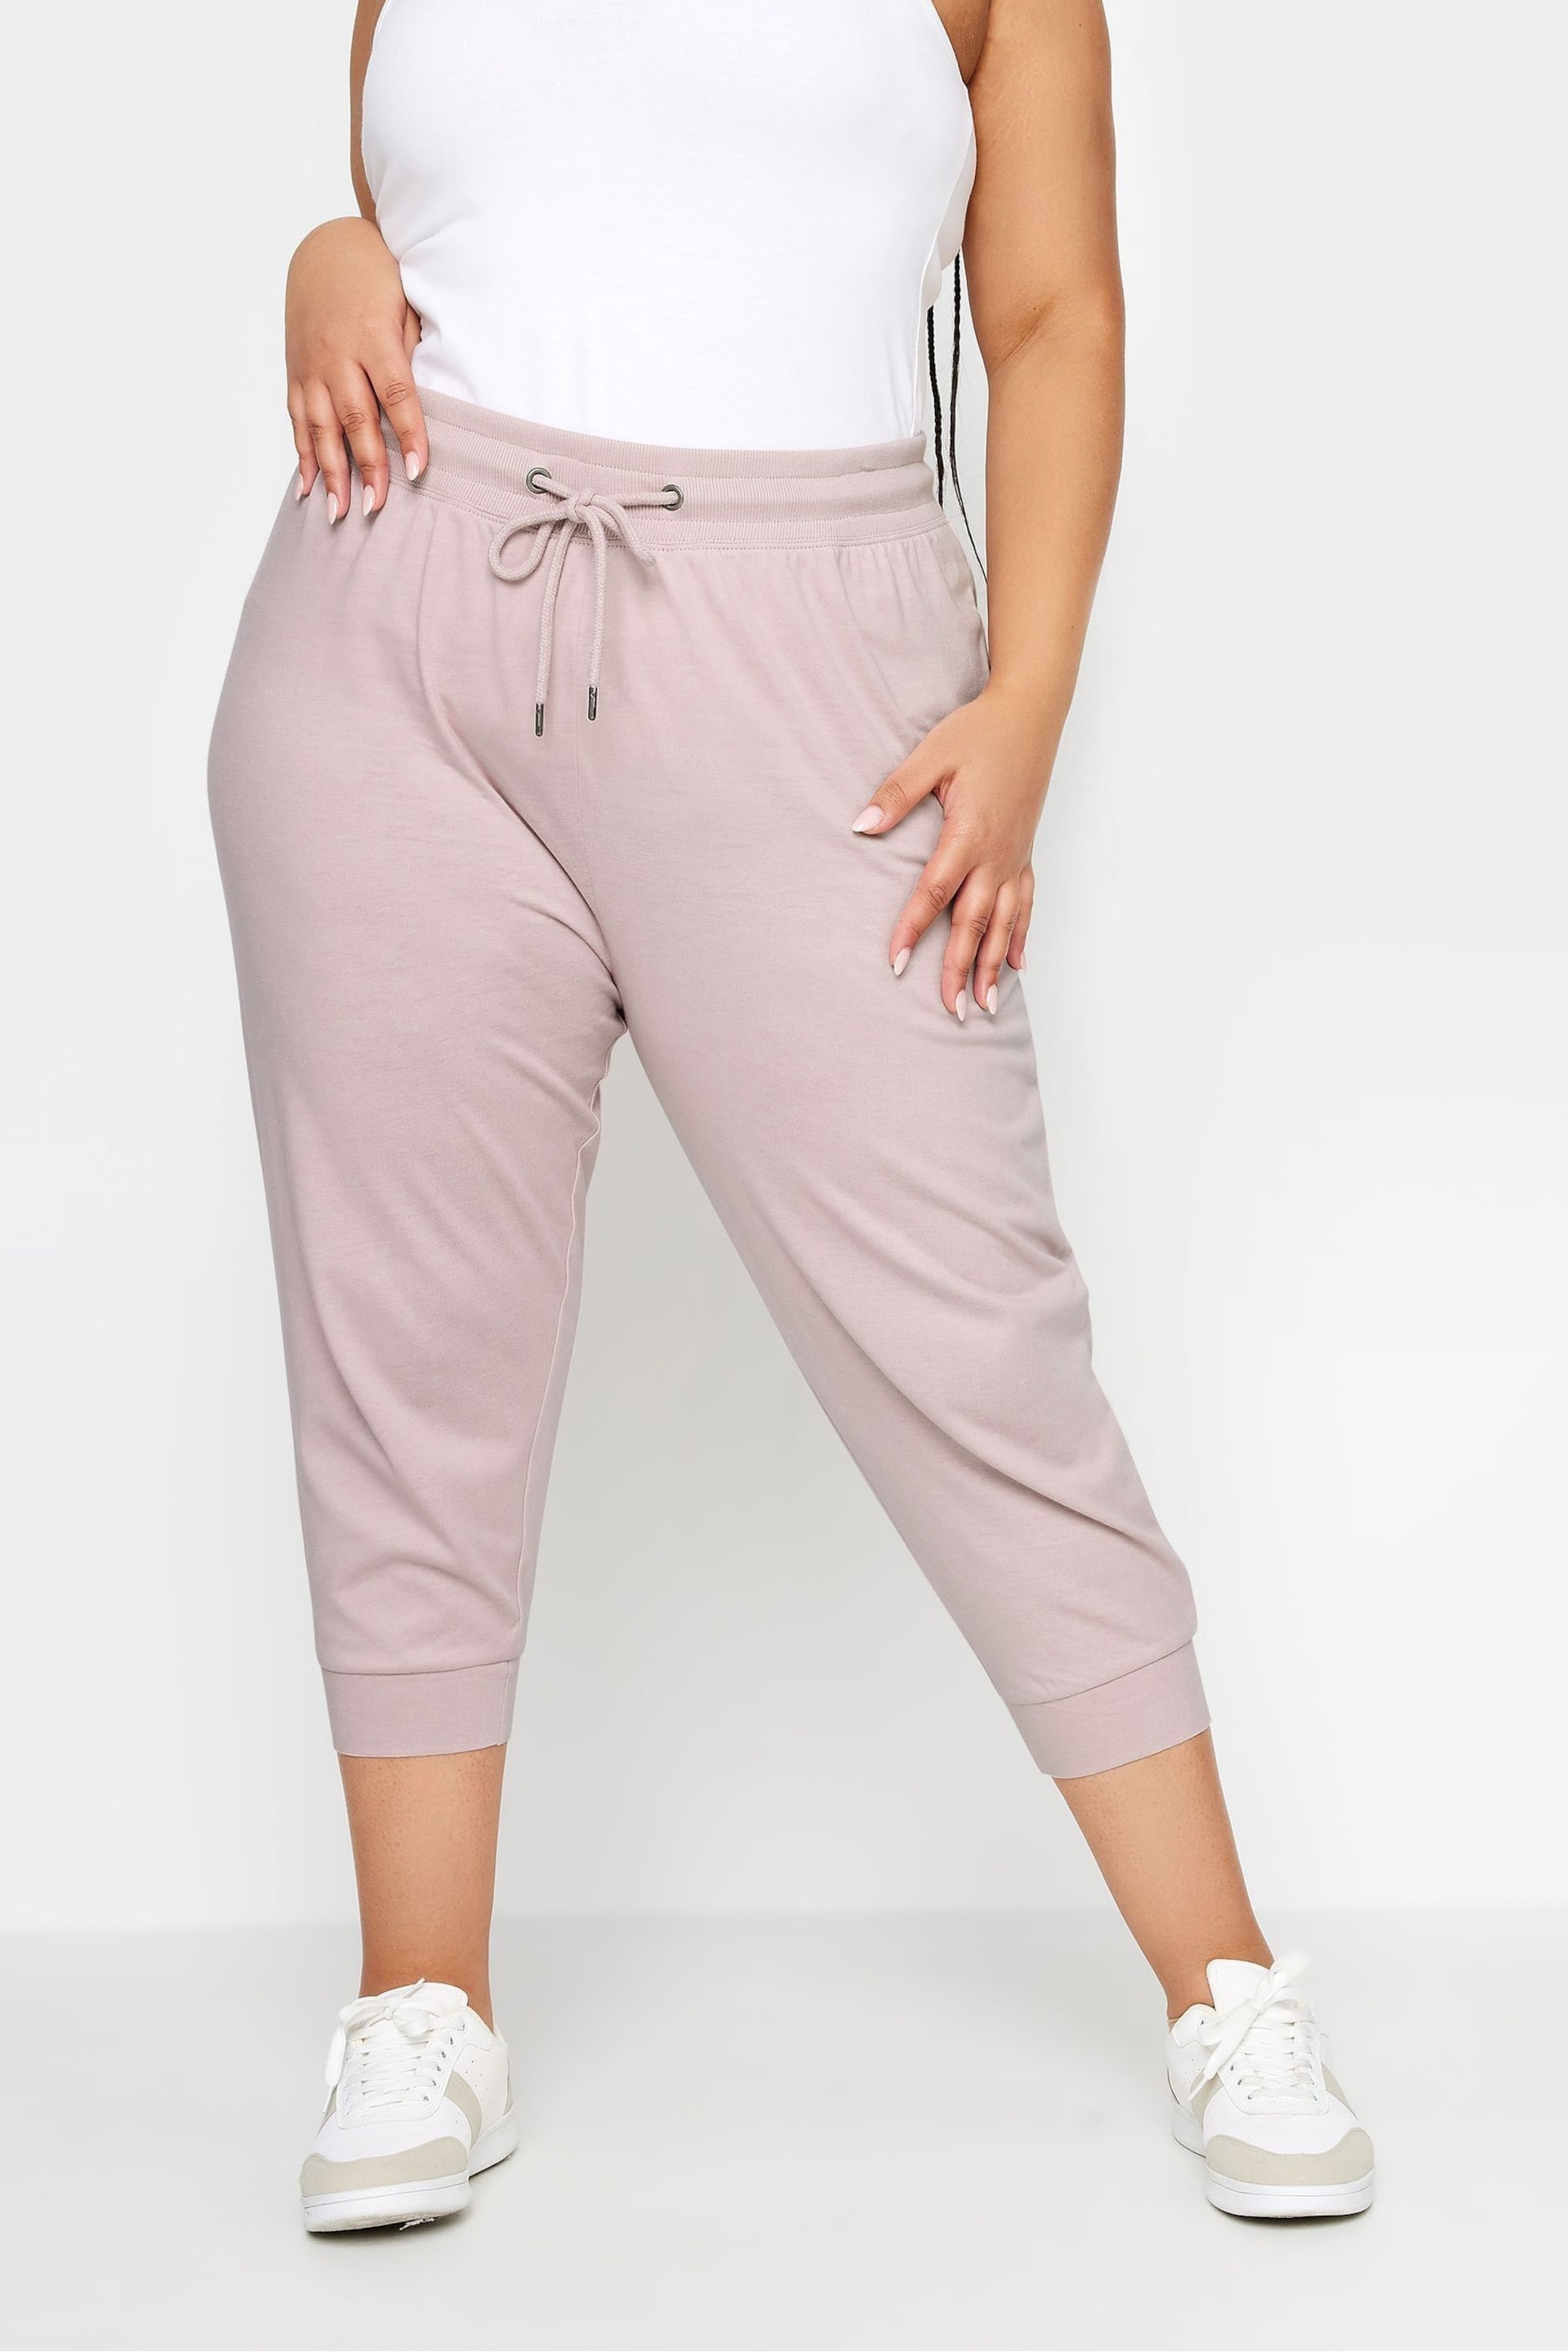 Yours Curve Pink Cropped Joggers - Image 1 of 3